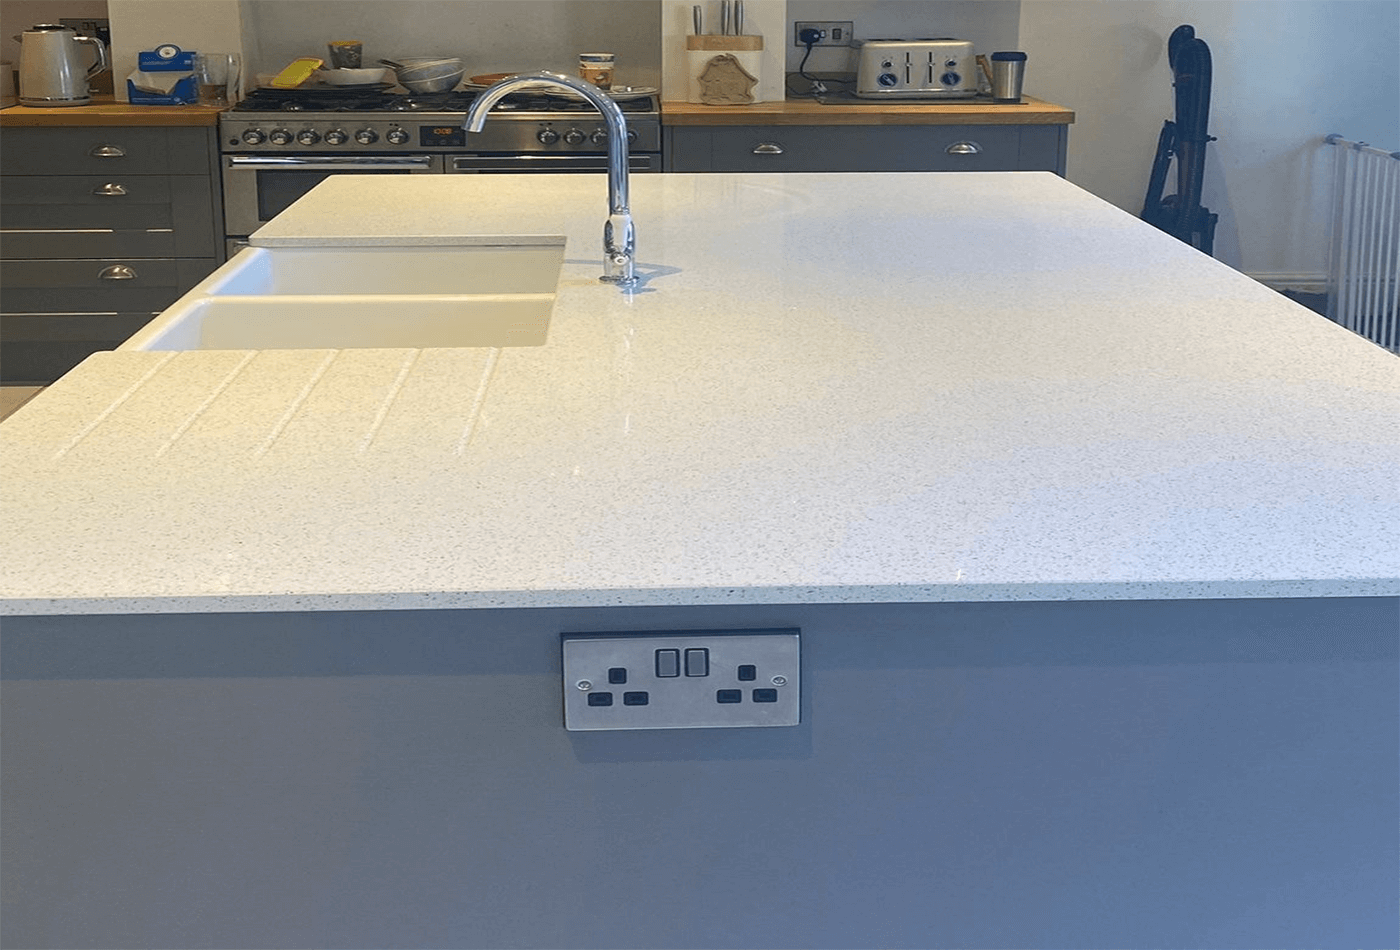 We Offer Matt Quartz Too, Try This for a Unique Kitchen Choice